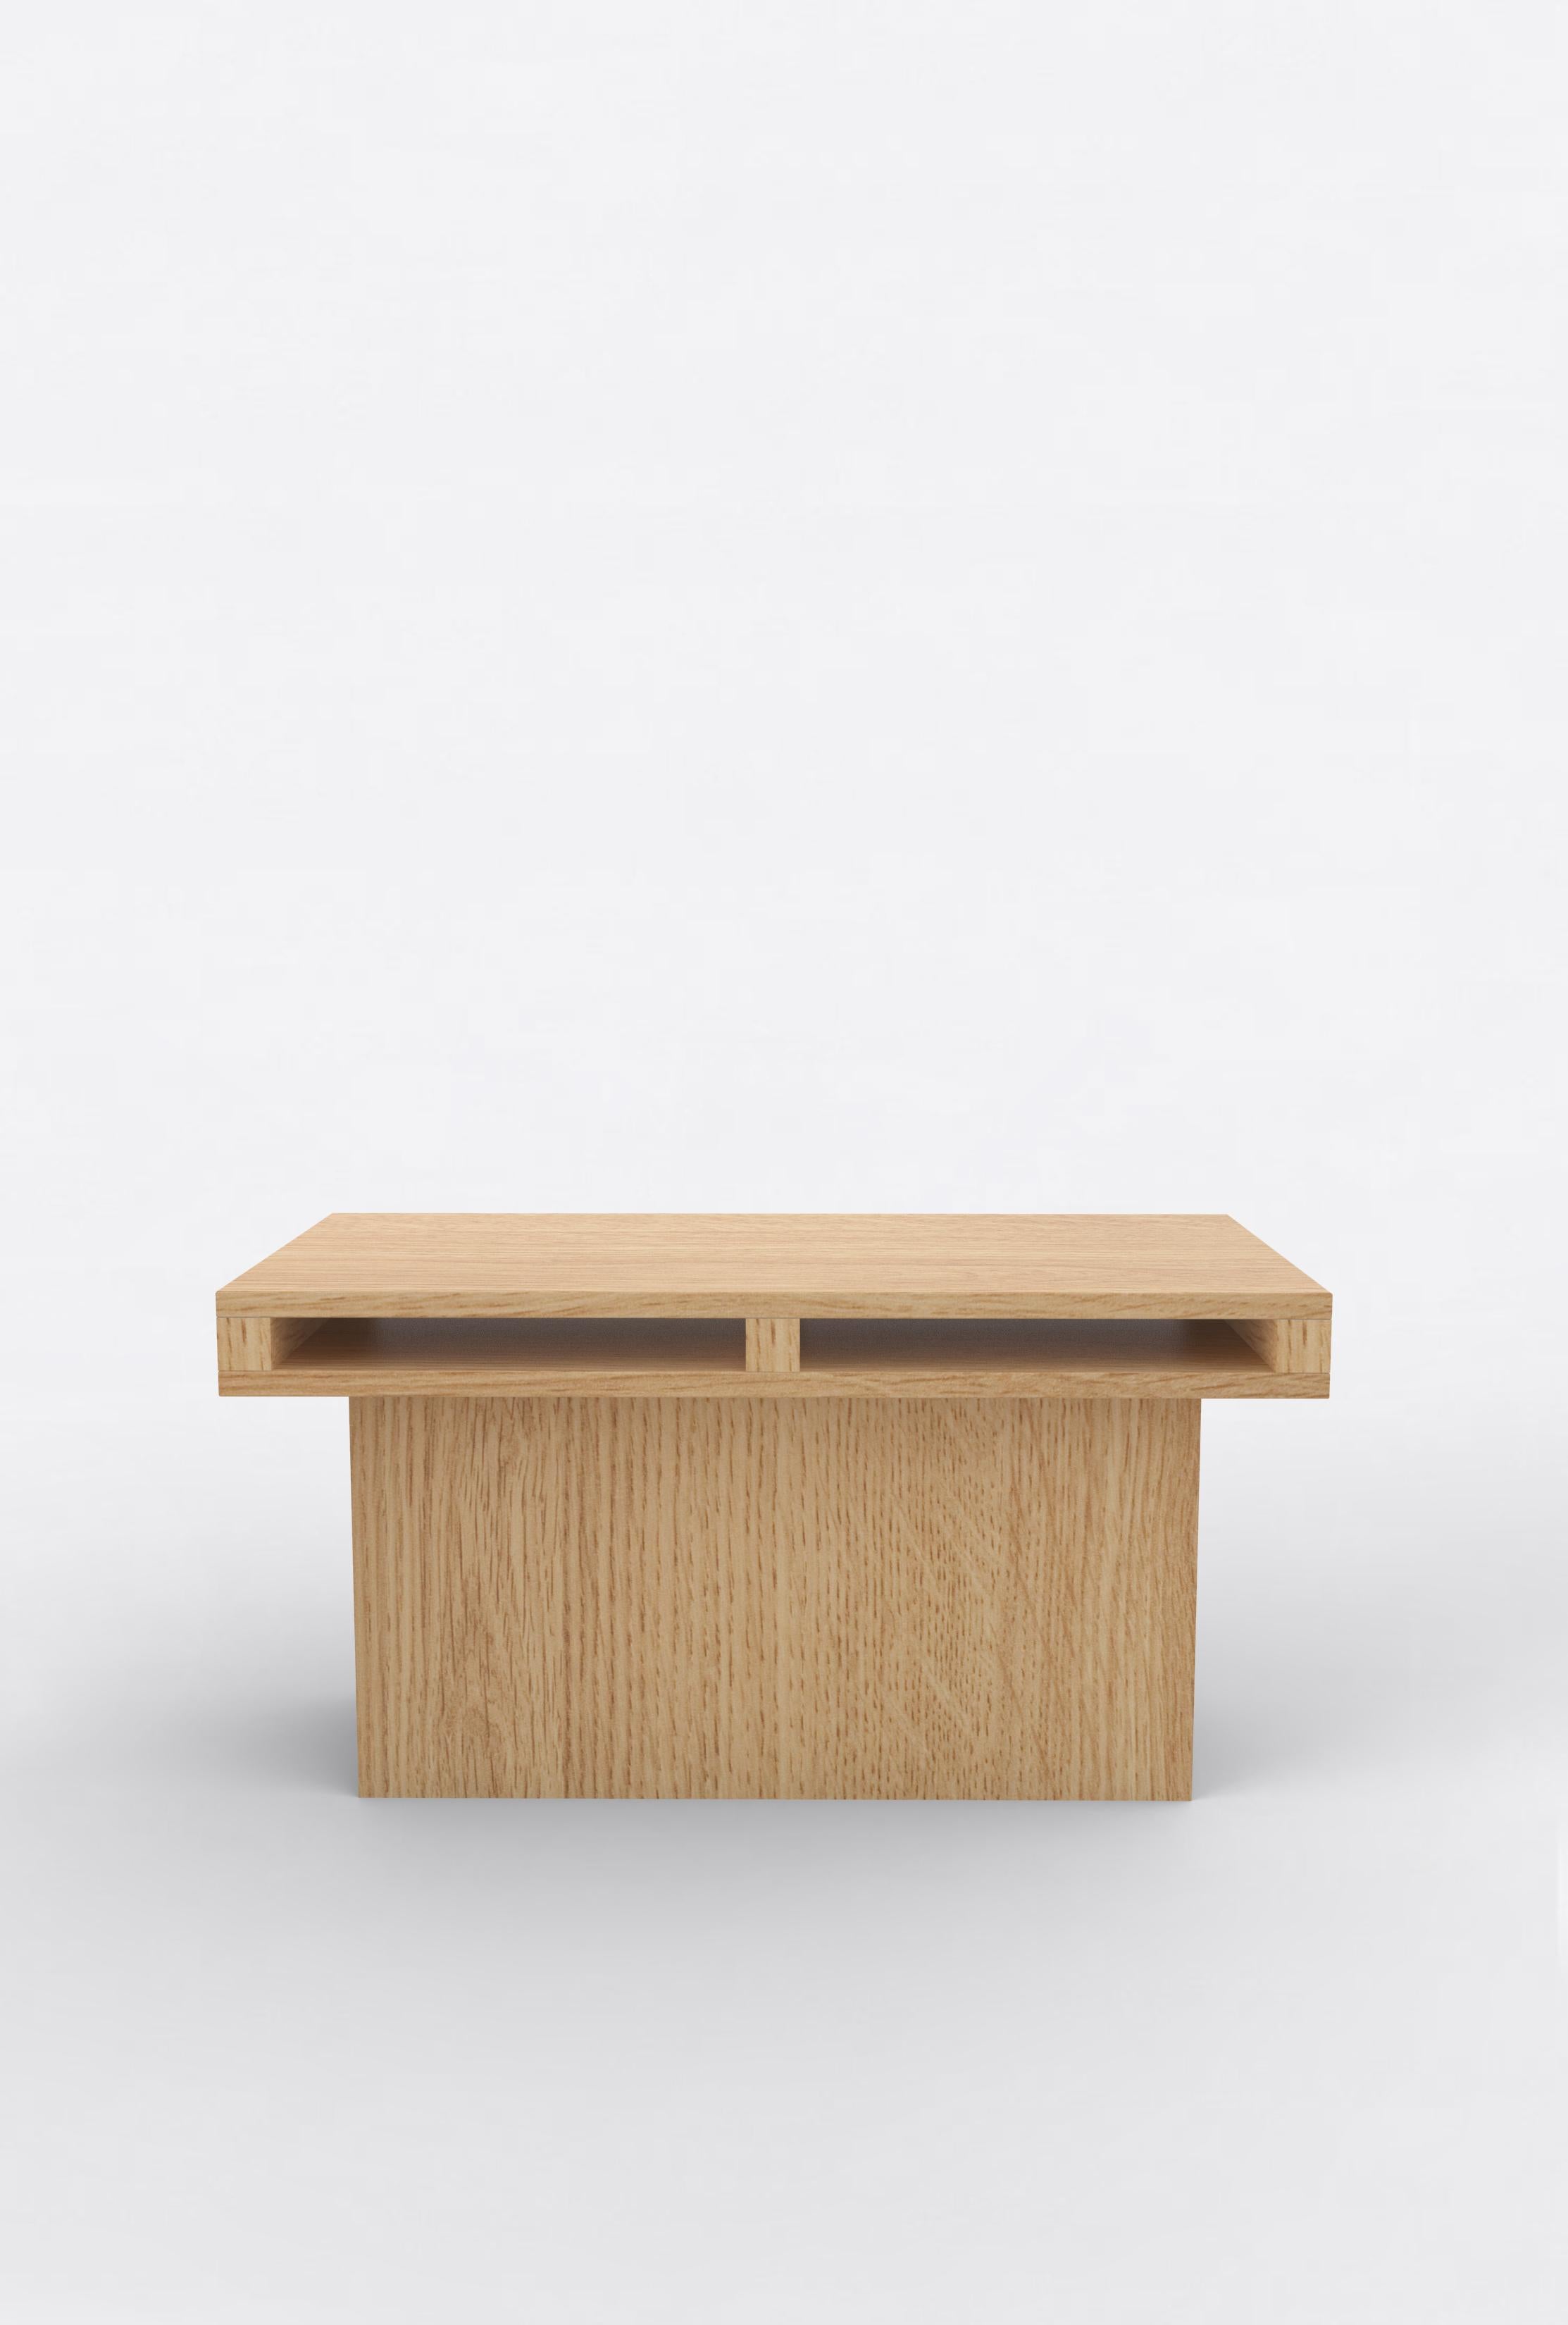 Orphan Work 102 End Table
Shown in oak.
Available in natural oak.
Measures: 31” L x 15” D x 15” H

Orphan work is designed to complement in the heart of Soho, New York City. Each piece is handmade in New York and Los Angeles by traditional artisans.